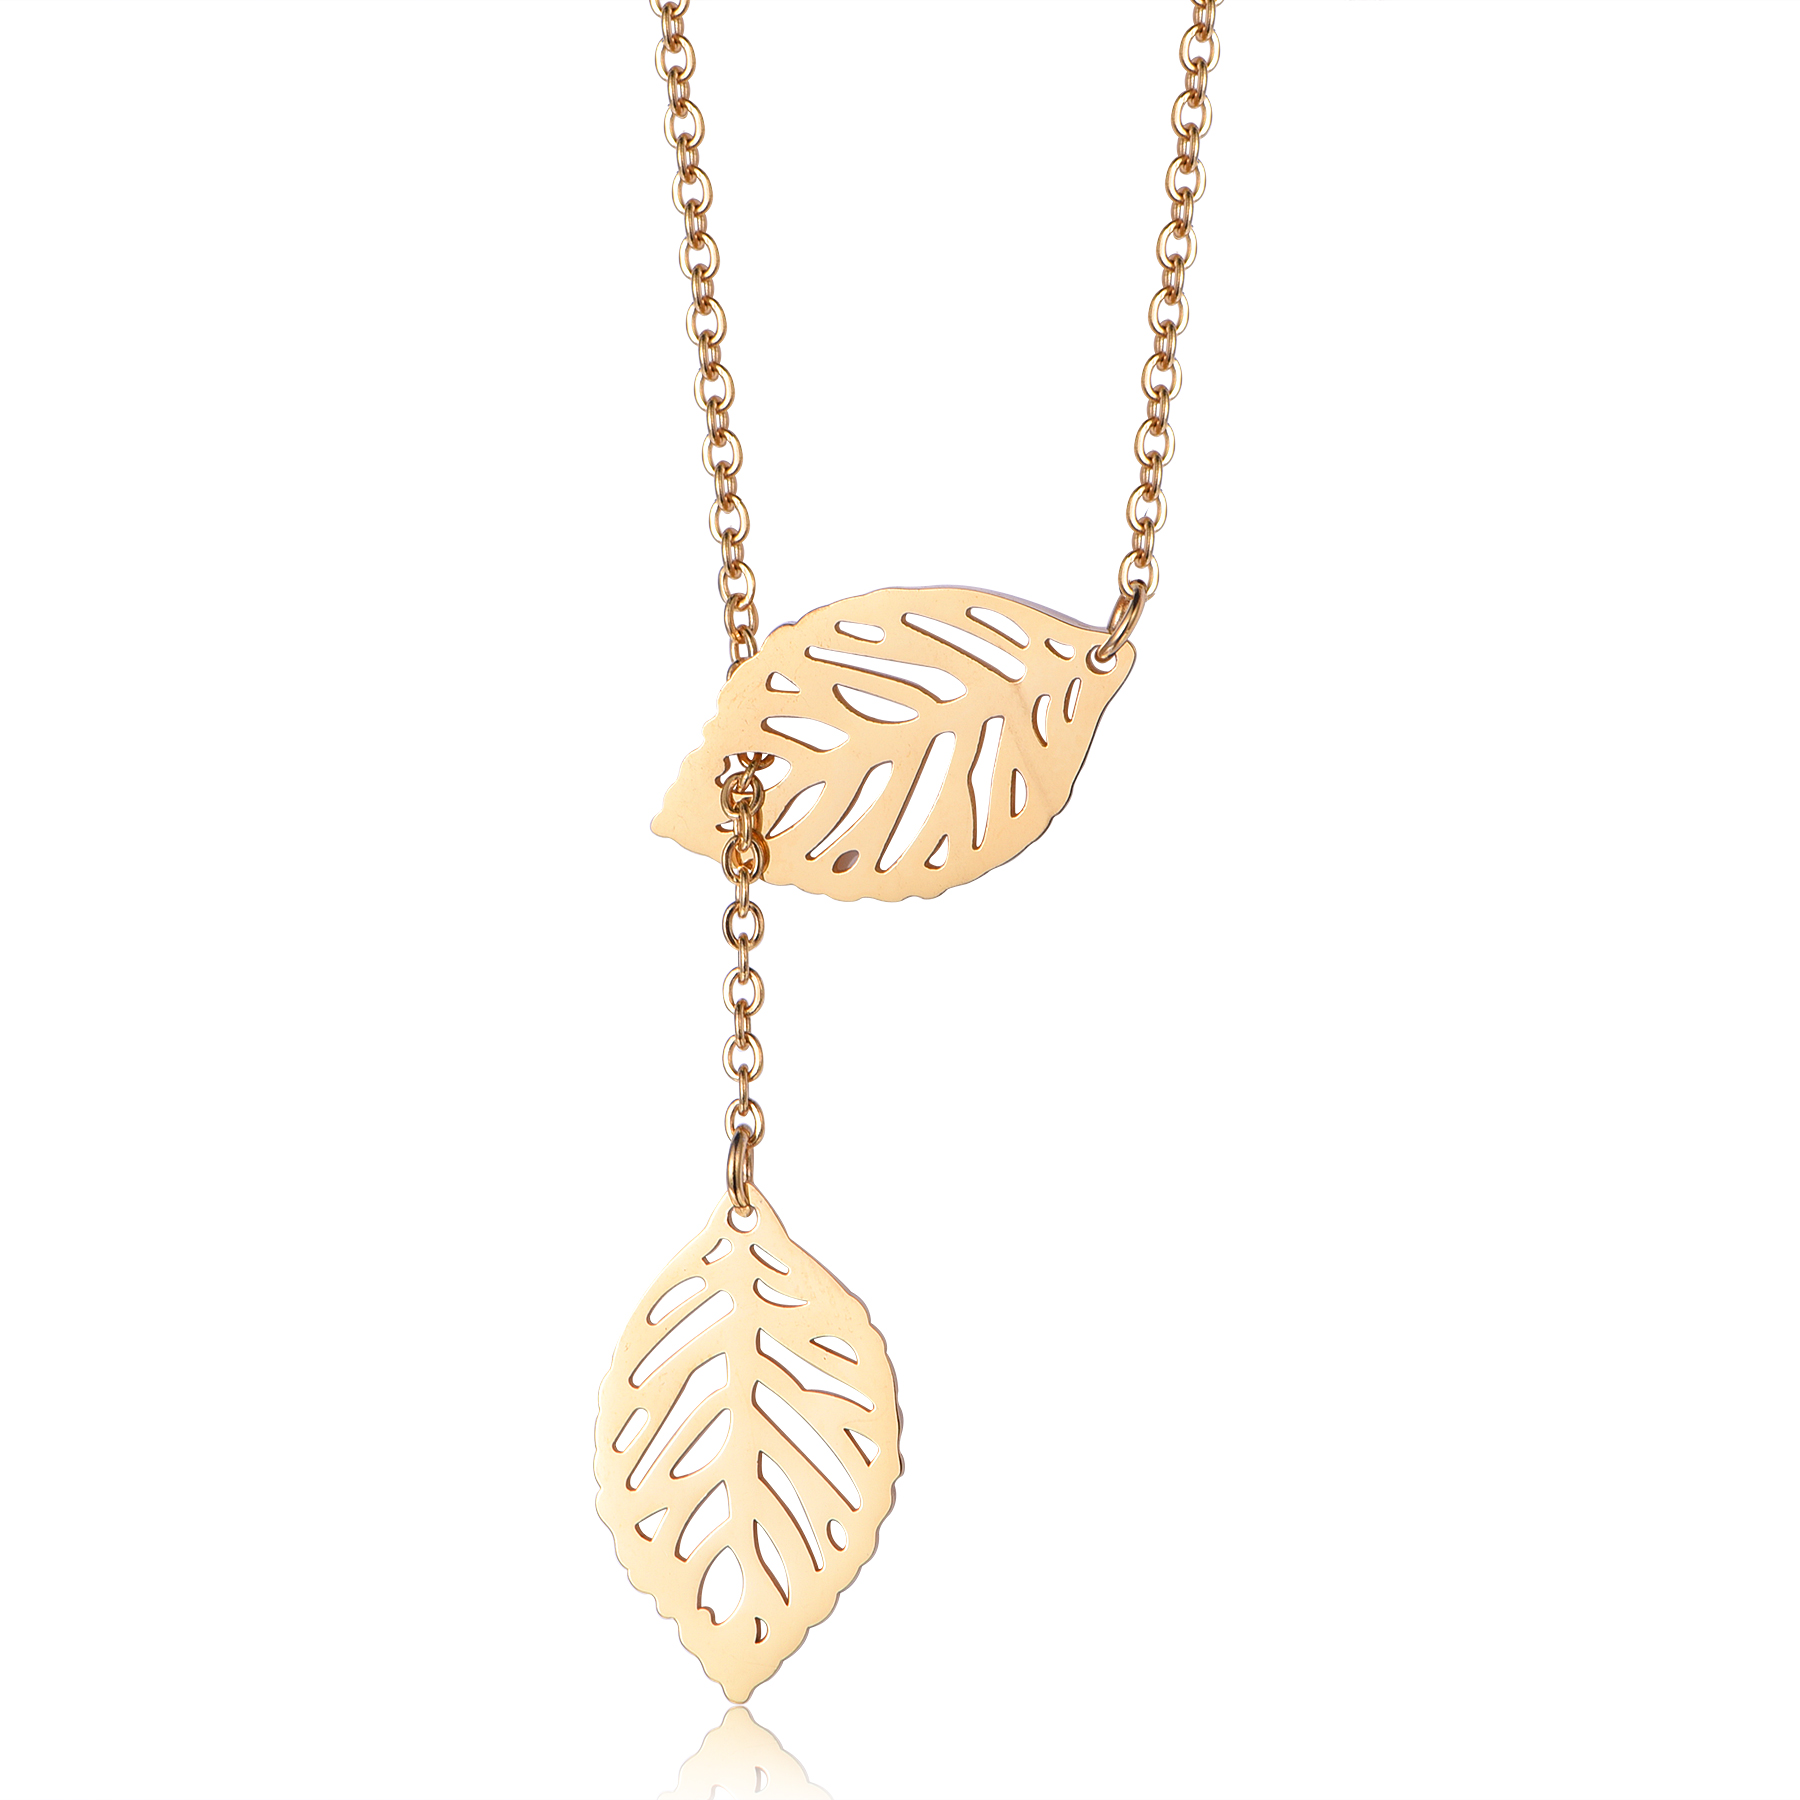 Shining 18K Gold Stainless Steel Hollow Leaf Lariat Necklace Wholesale ND6-10